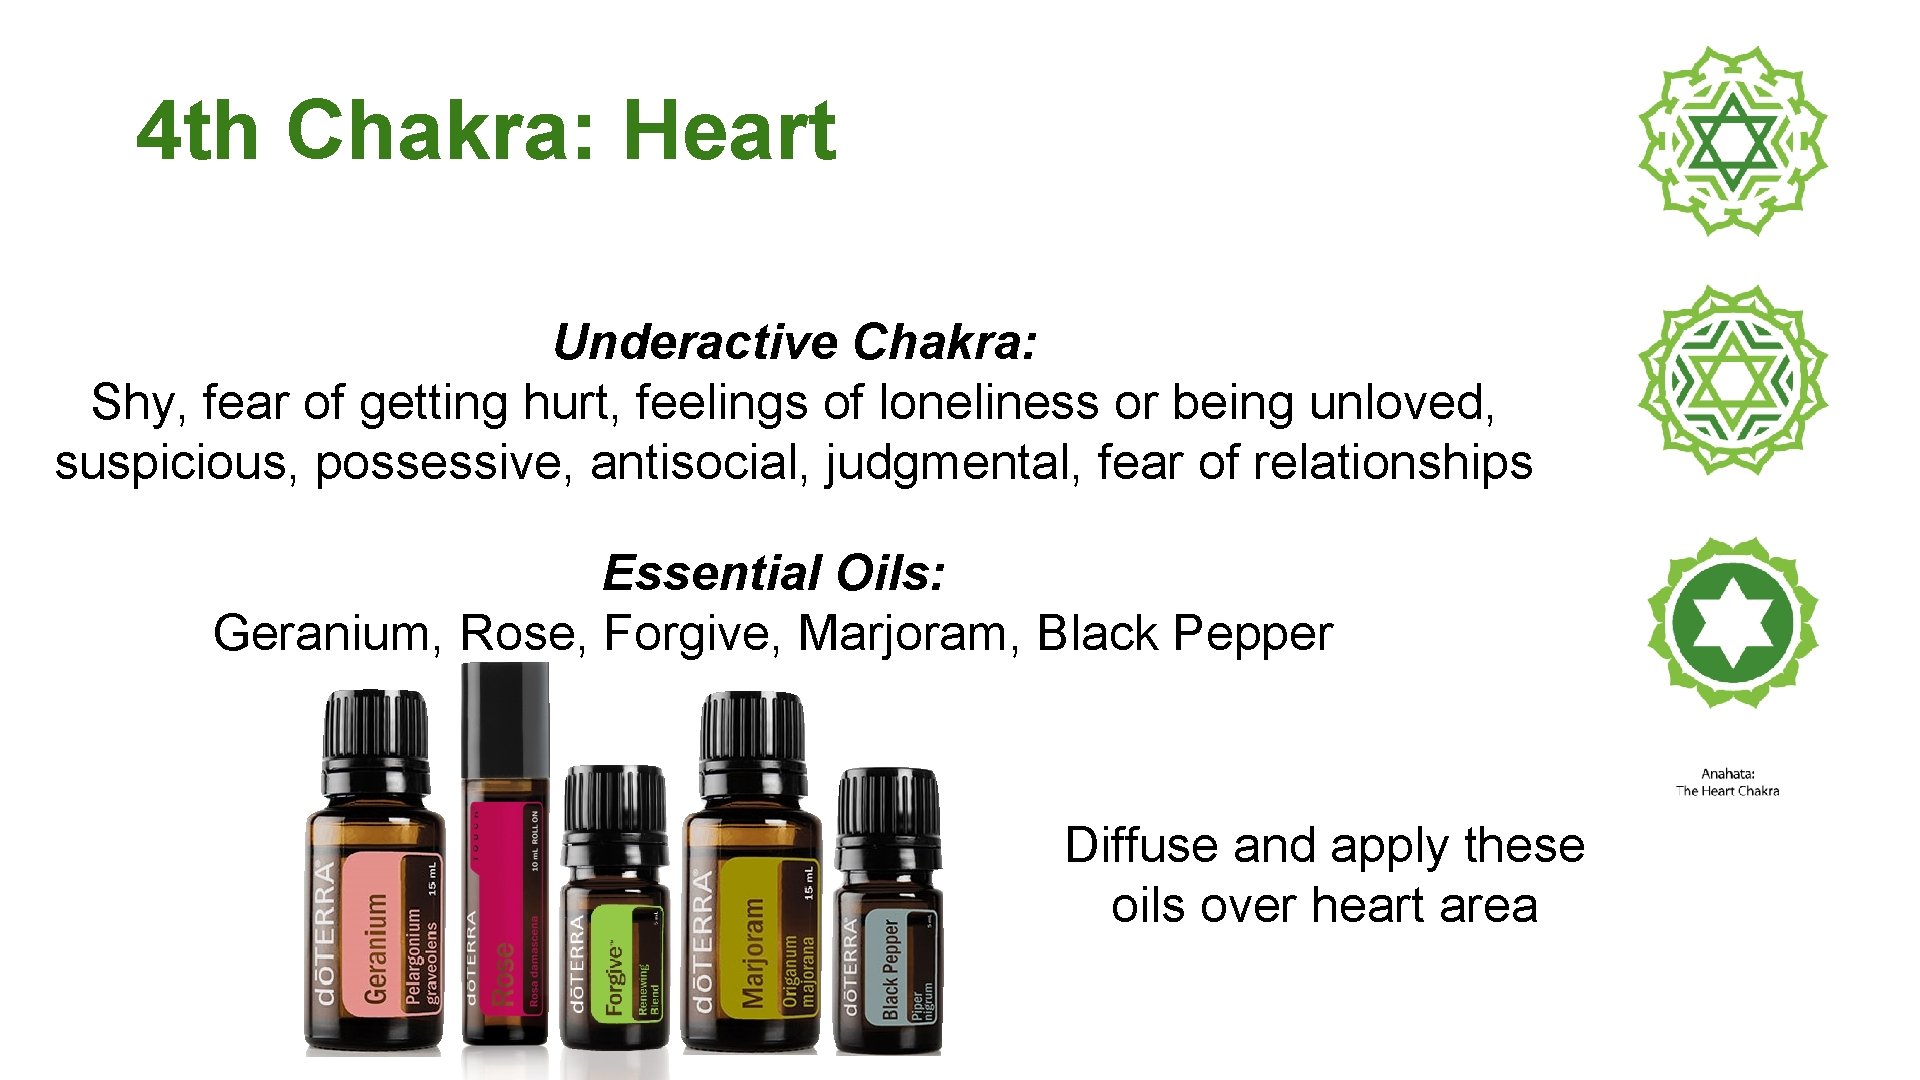 4 th Chakra: Heart Underactive Chakra: Shy, fear of getting hurt, feelings of loneliness